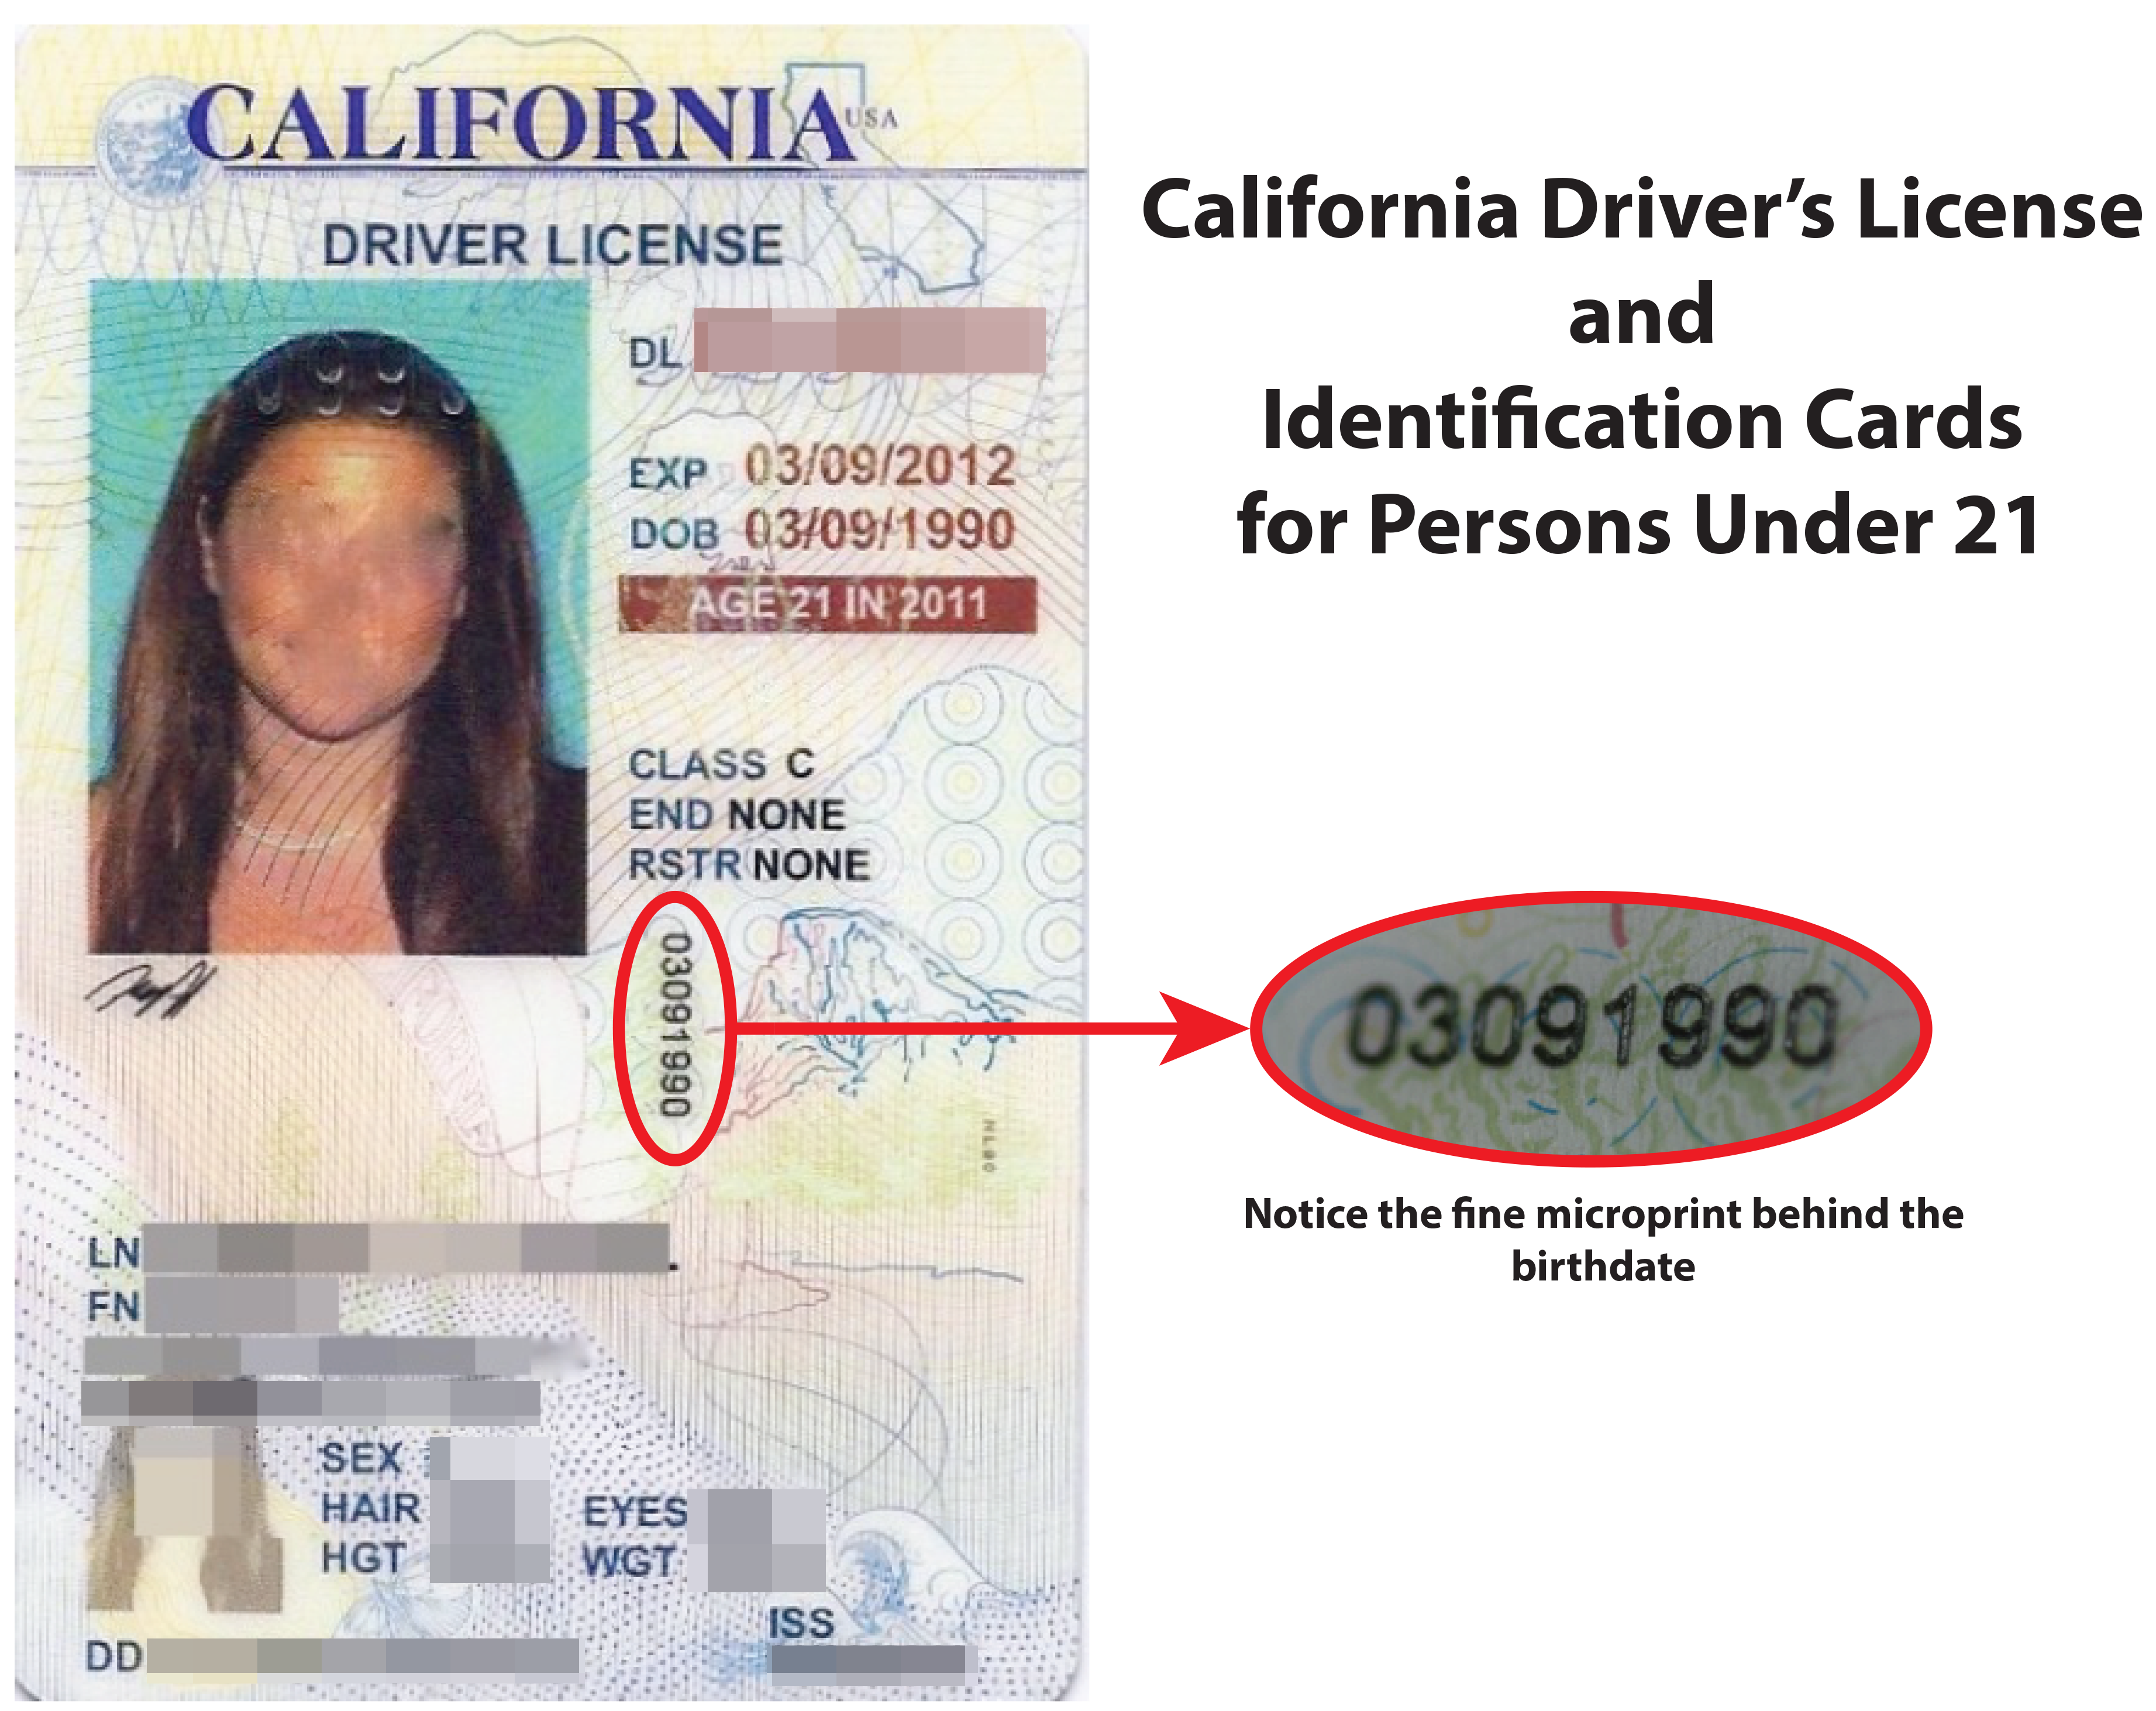 Ohio Drivers License Barcode Format